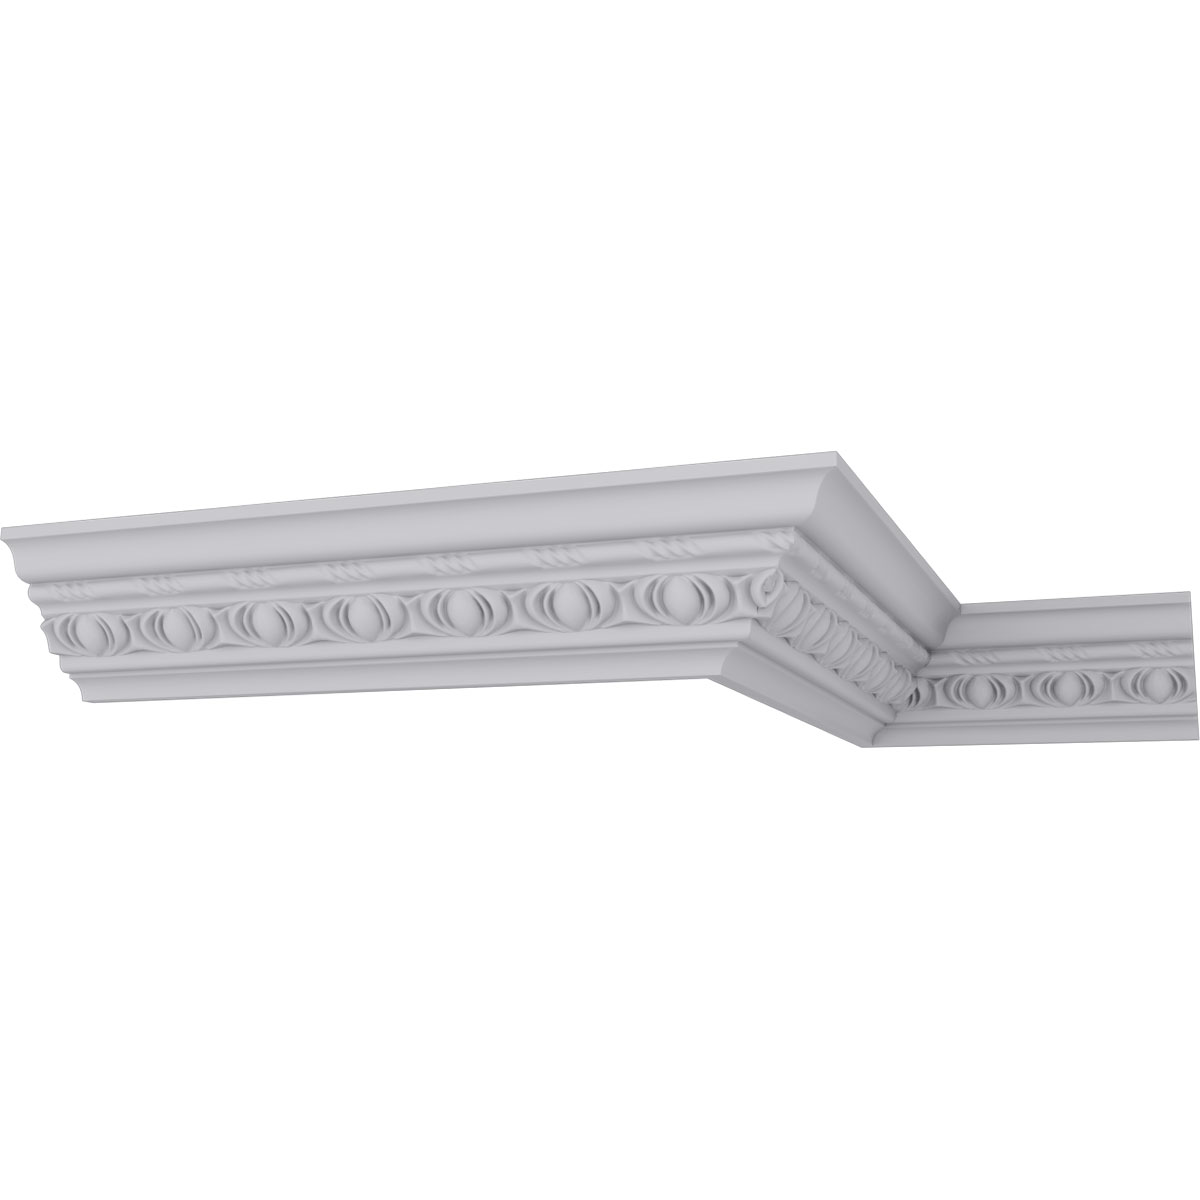 4 3/4"H x 4 3/4"P x 6 3/4"F x 94 3/8"L, (3 1/8" Repeat), Jackson Egg and Dart Crown Moulding - image 5 of 10